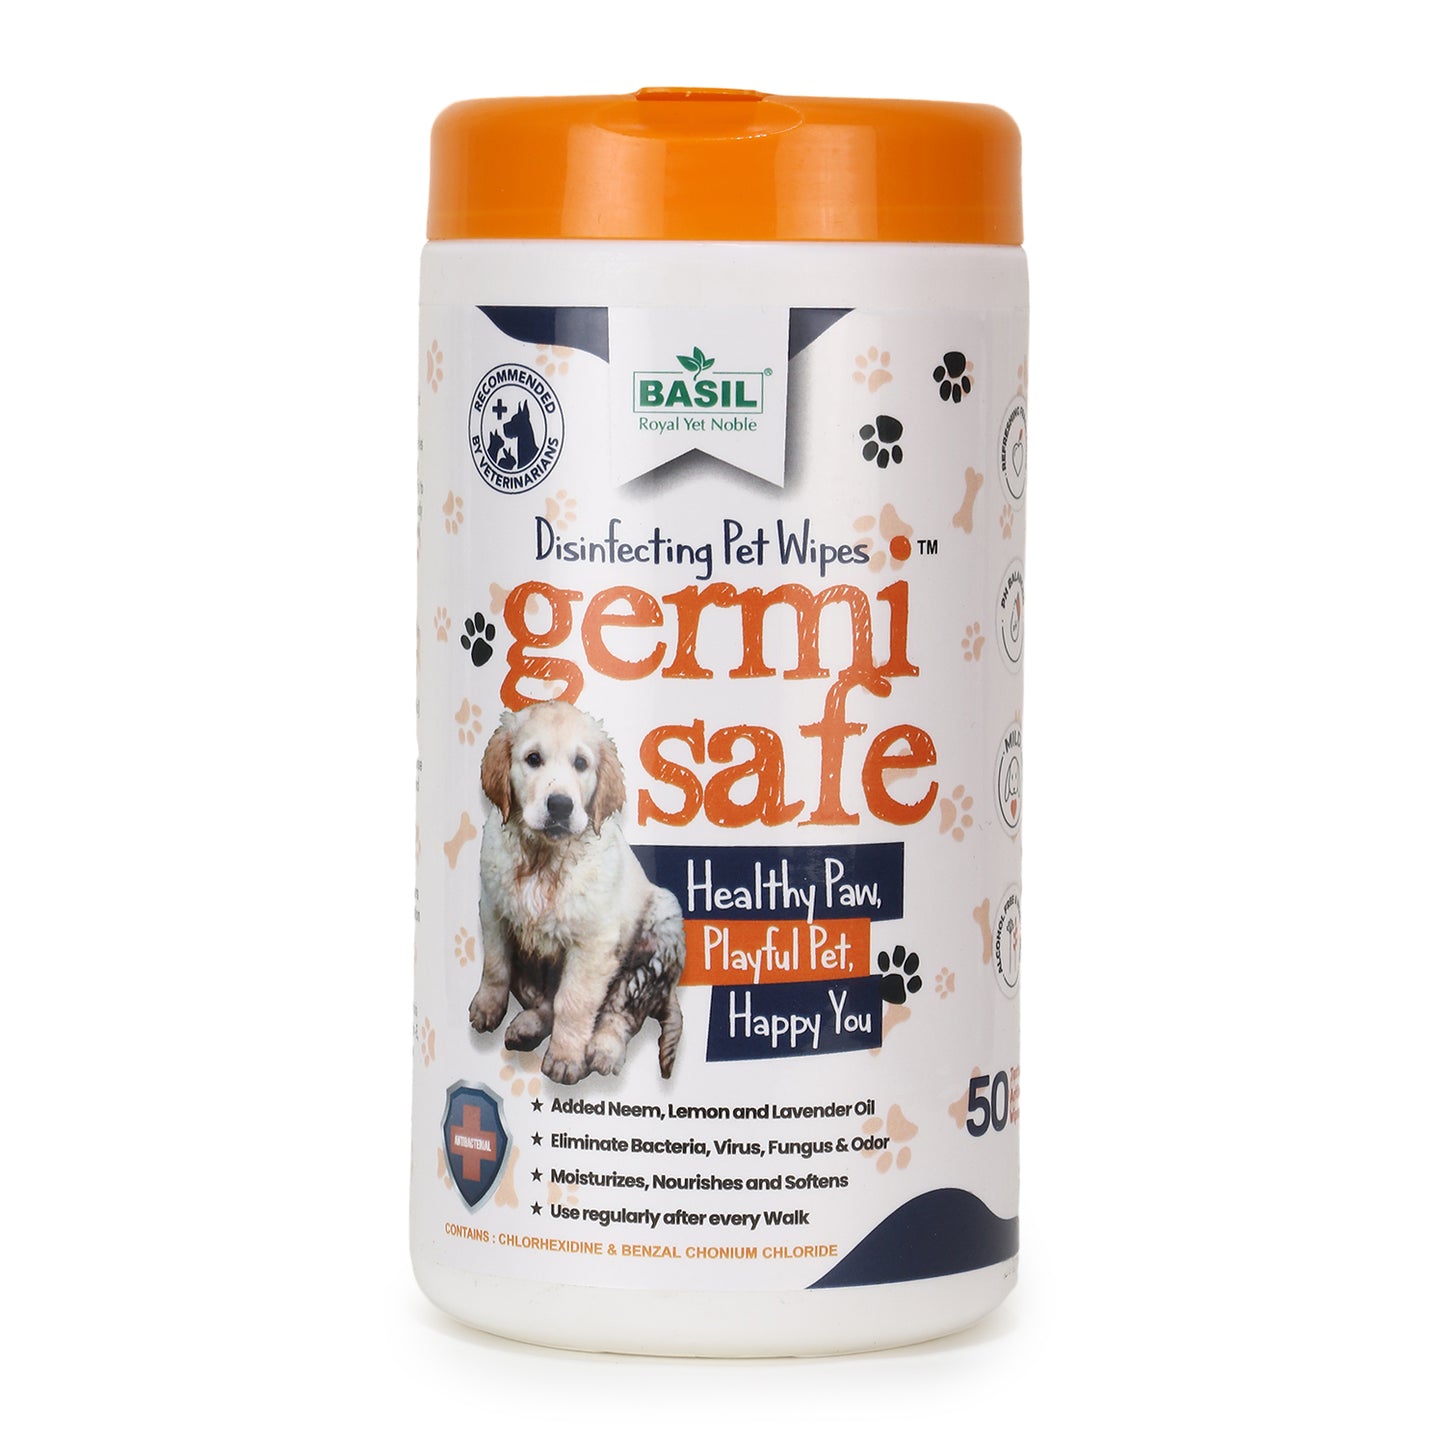 BASIL Germisafe Pet Wipes for Dogs, 50 Wipes with Added Neem, Lemon and Lavender Oil